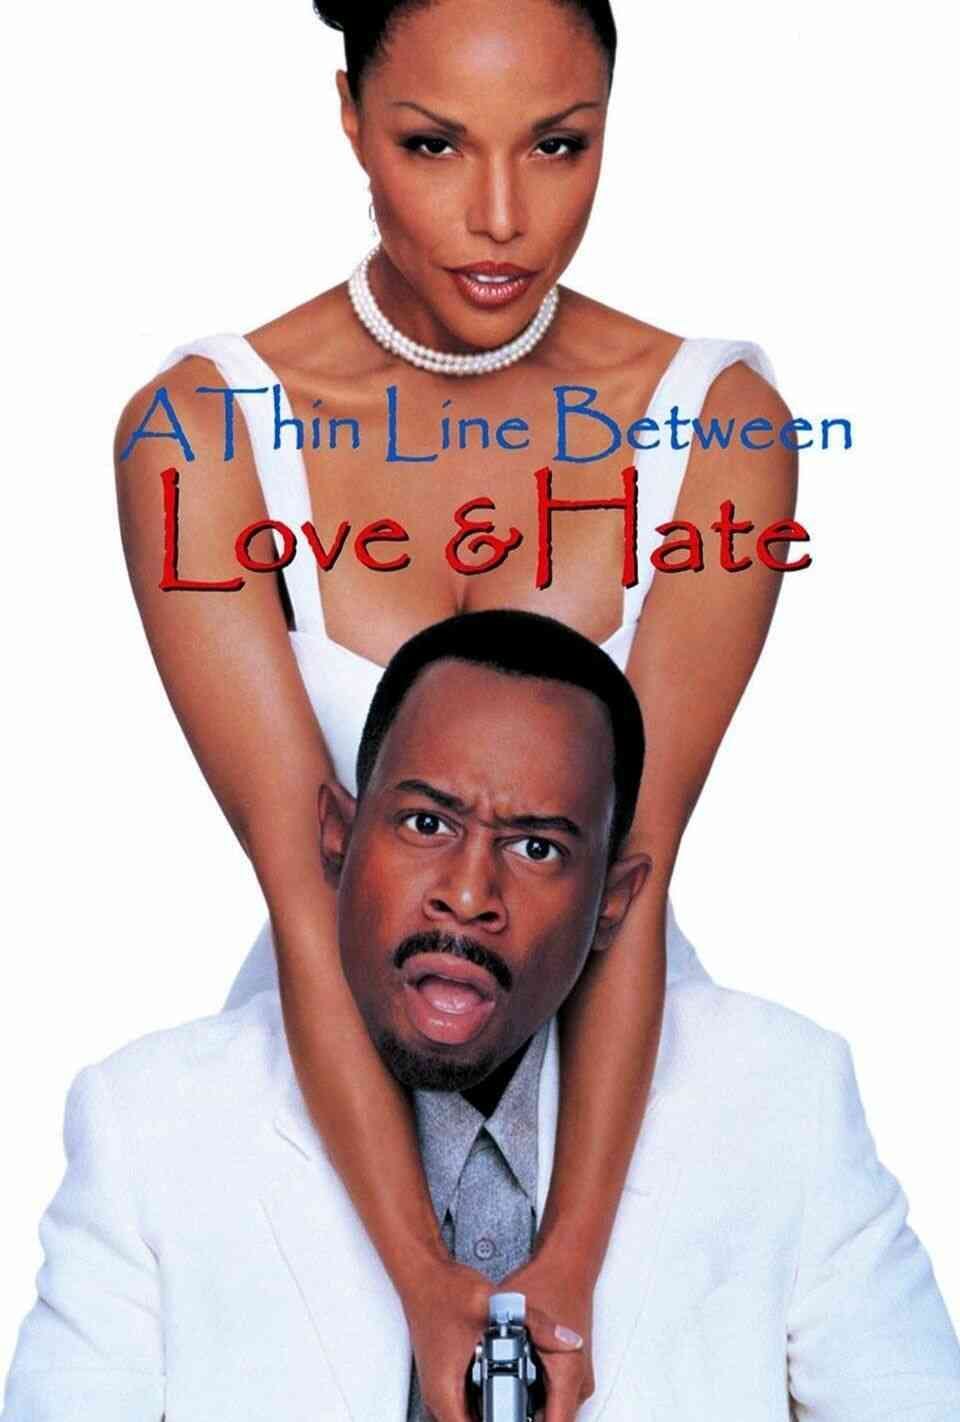 Read A Thin Line Between Love and Hate screenplay.